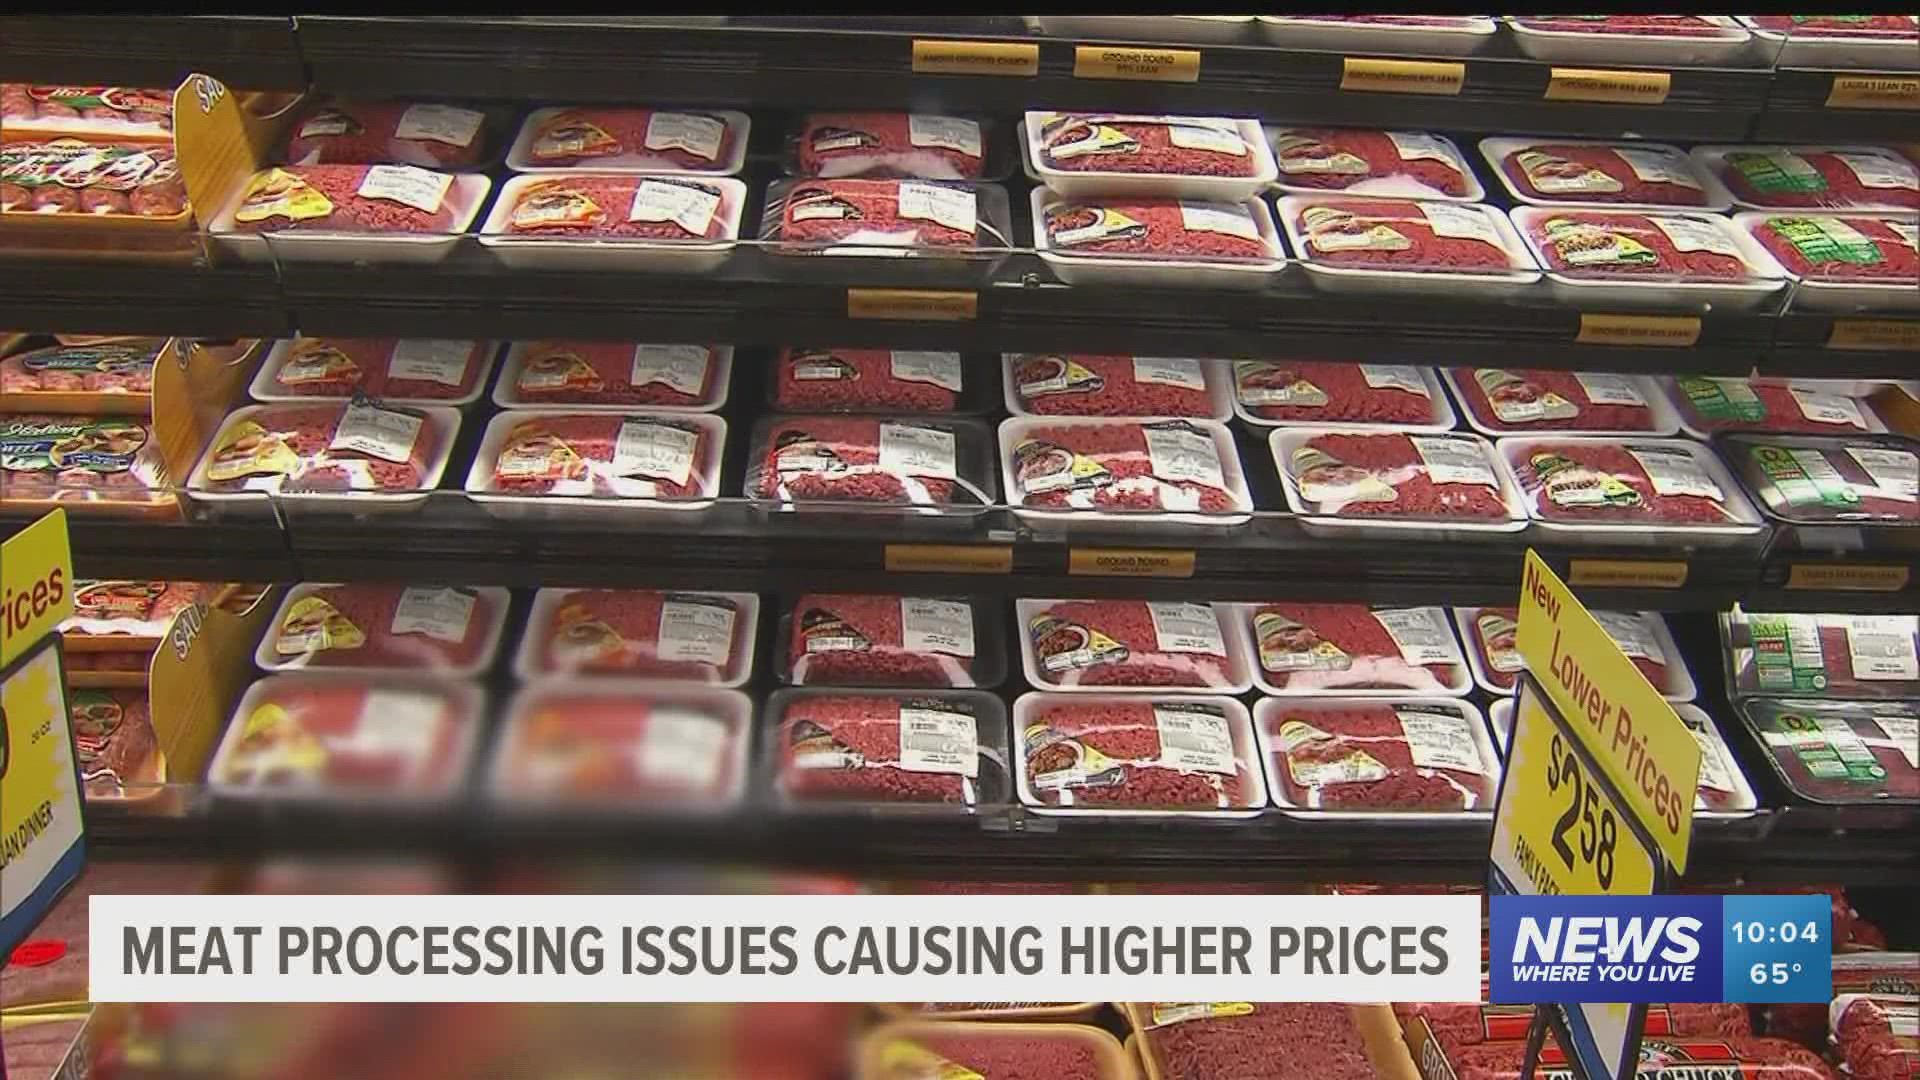 Farmers are upset over rising beef prices, saying while we’re paying more for beef and other meats at the grocery store, they're not seeing any of that extra money.